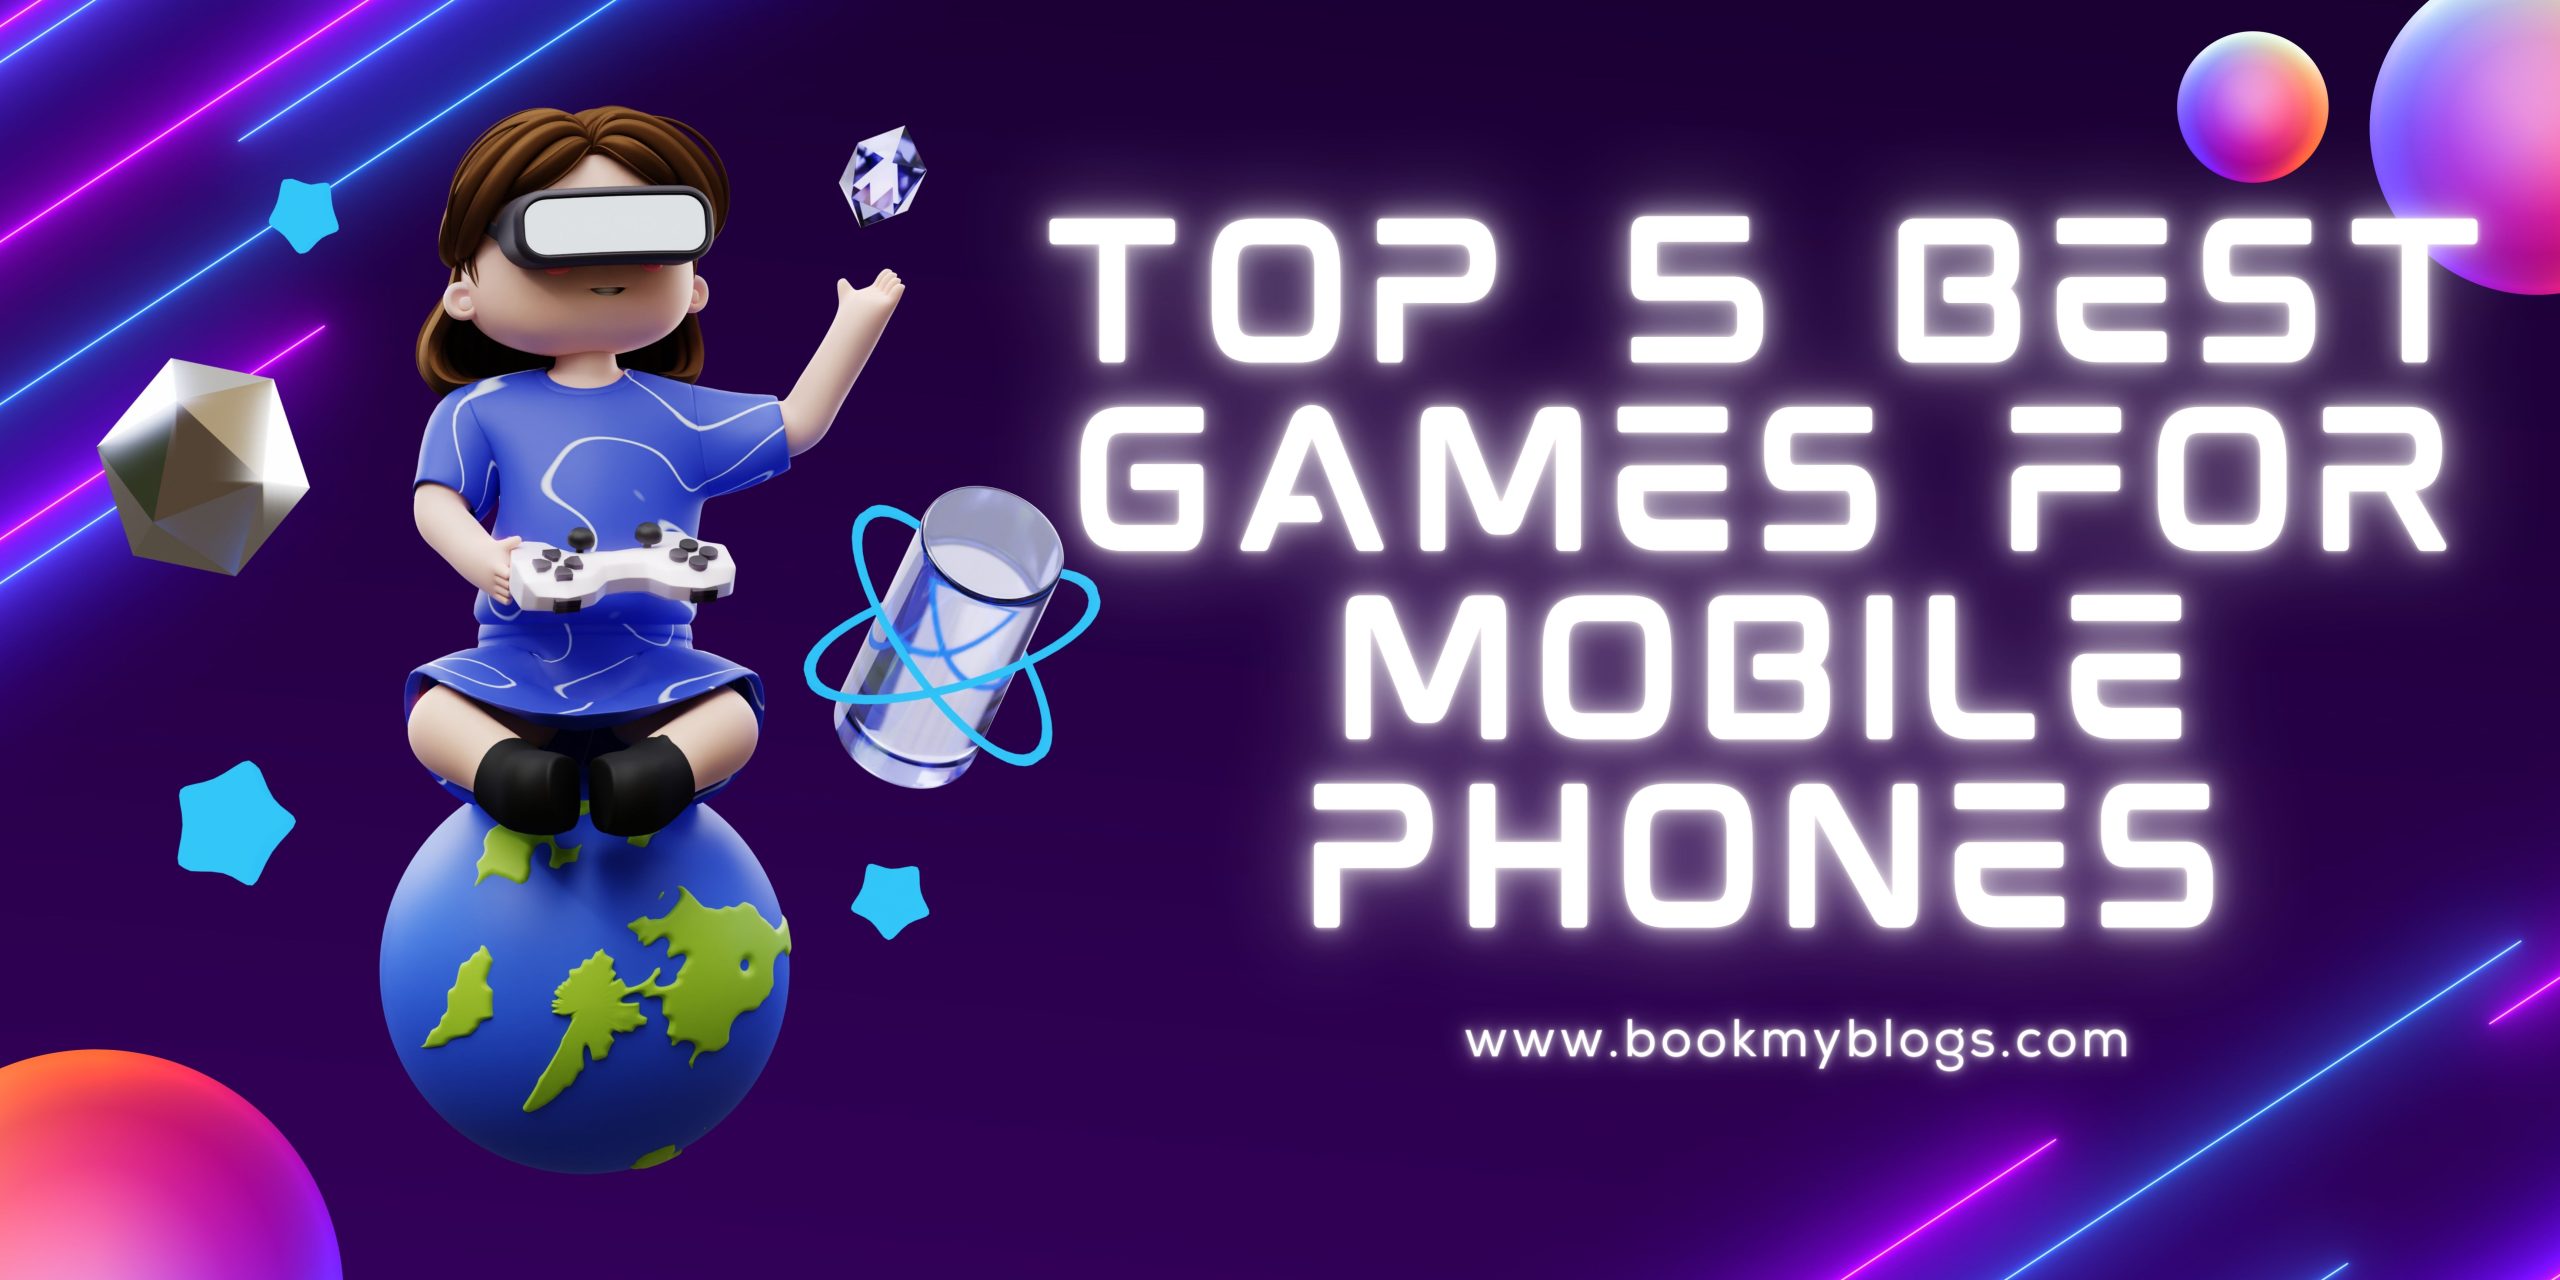 Top 5 Best Games For Mobile Phones